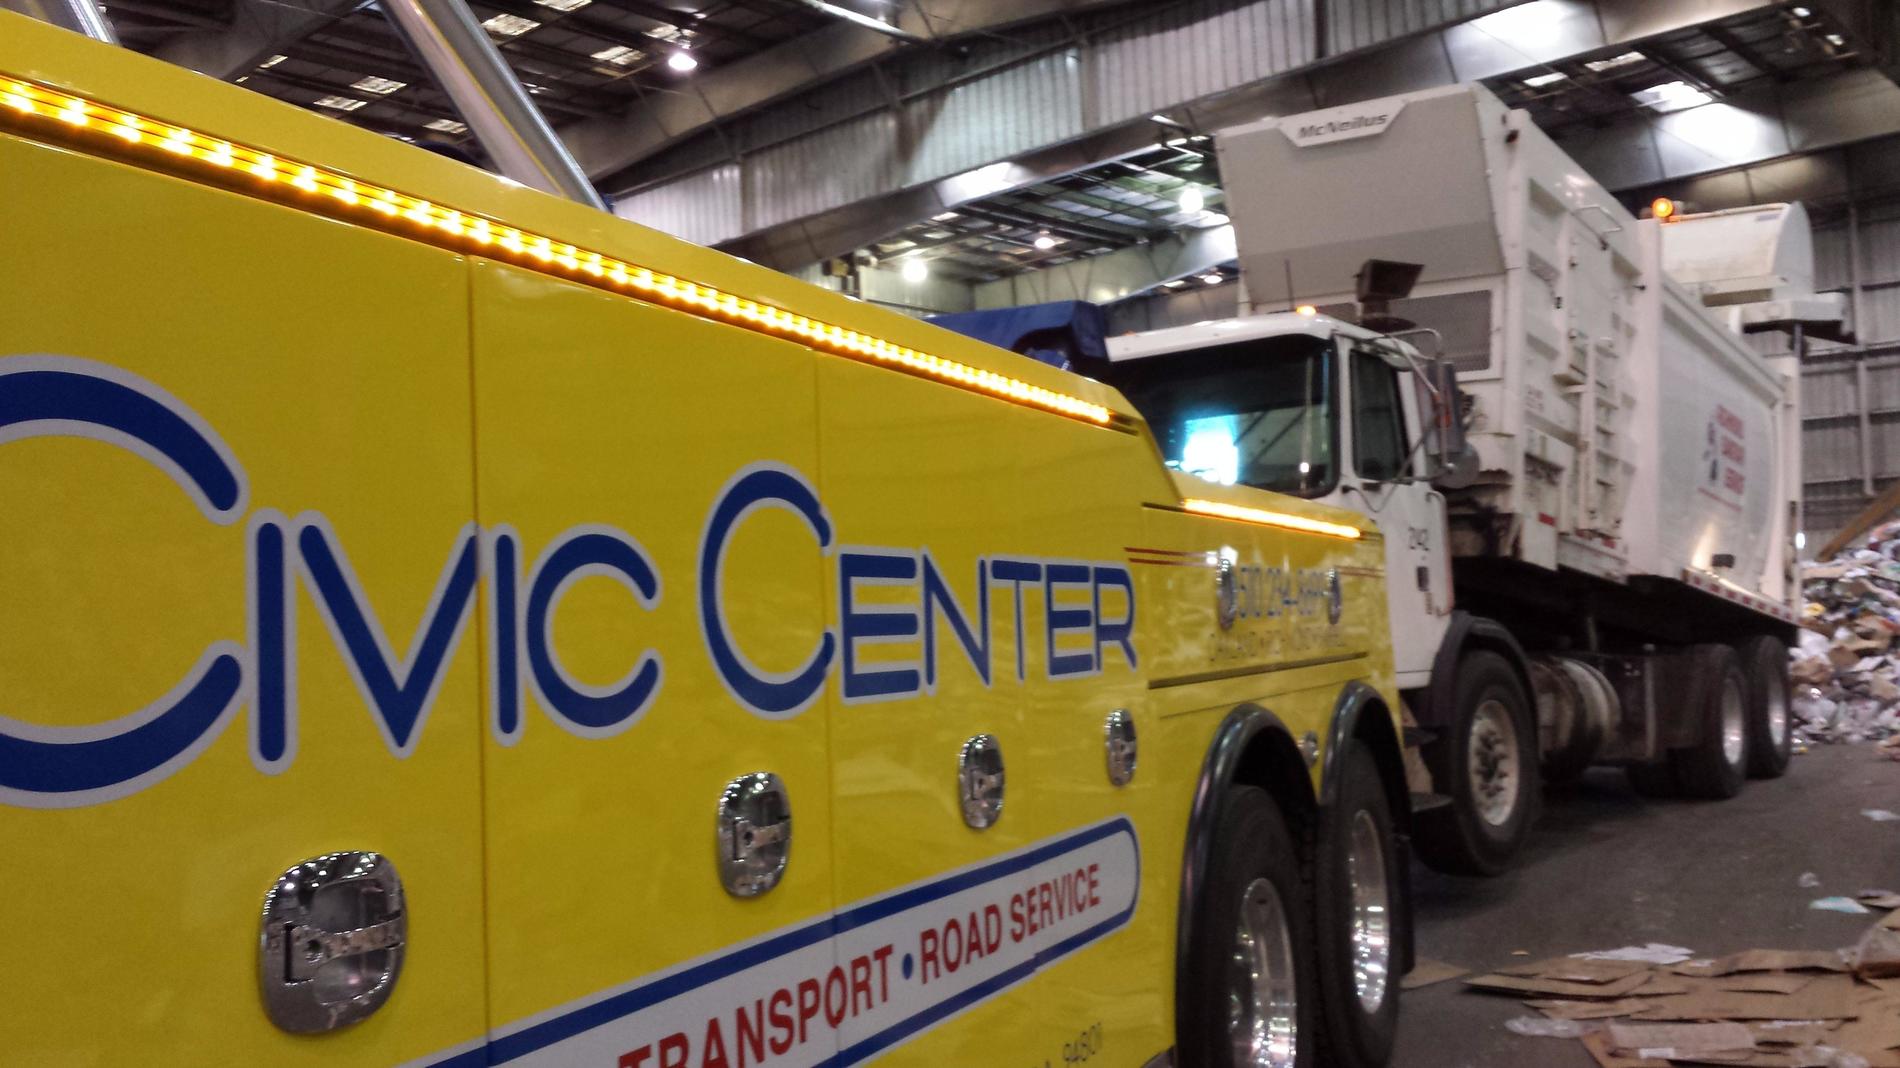 Images Civic Center Towing, Transport & Road Service